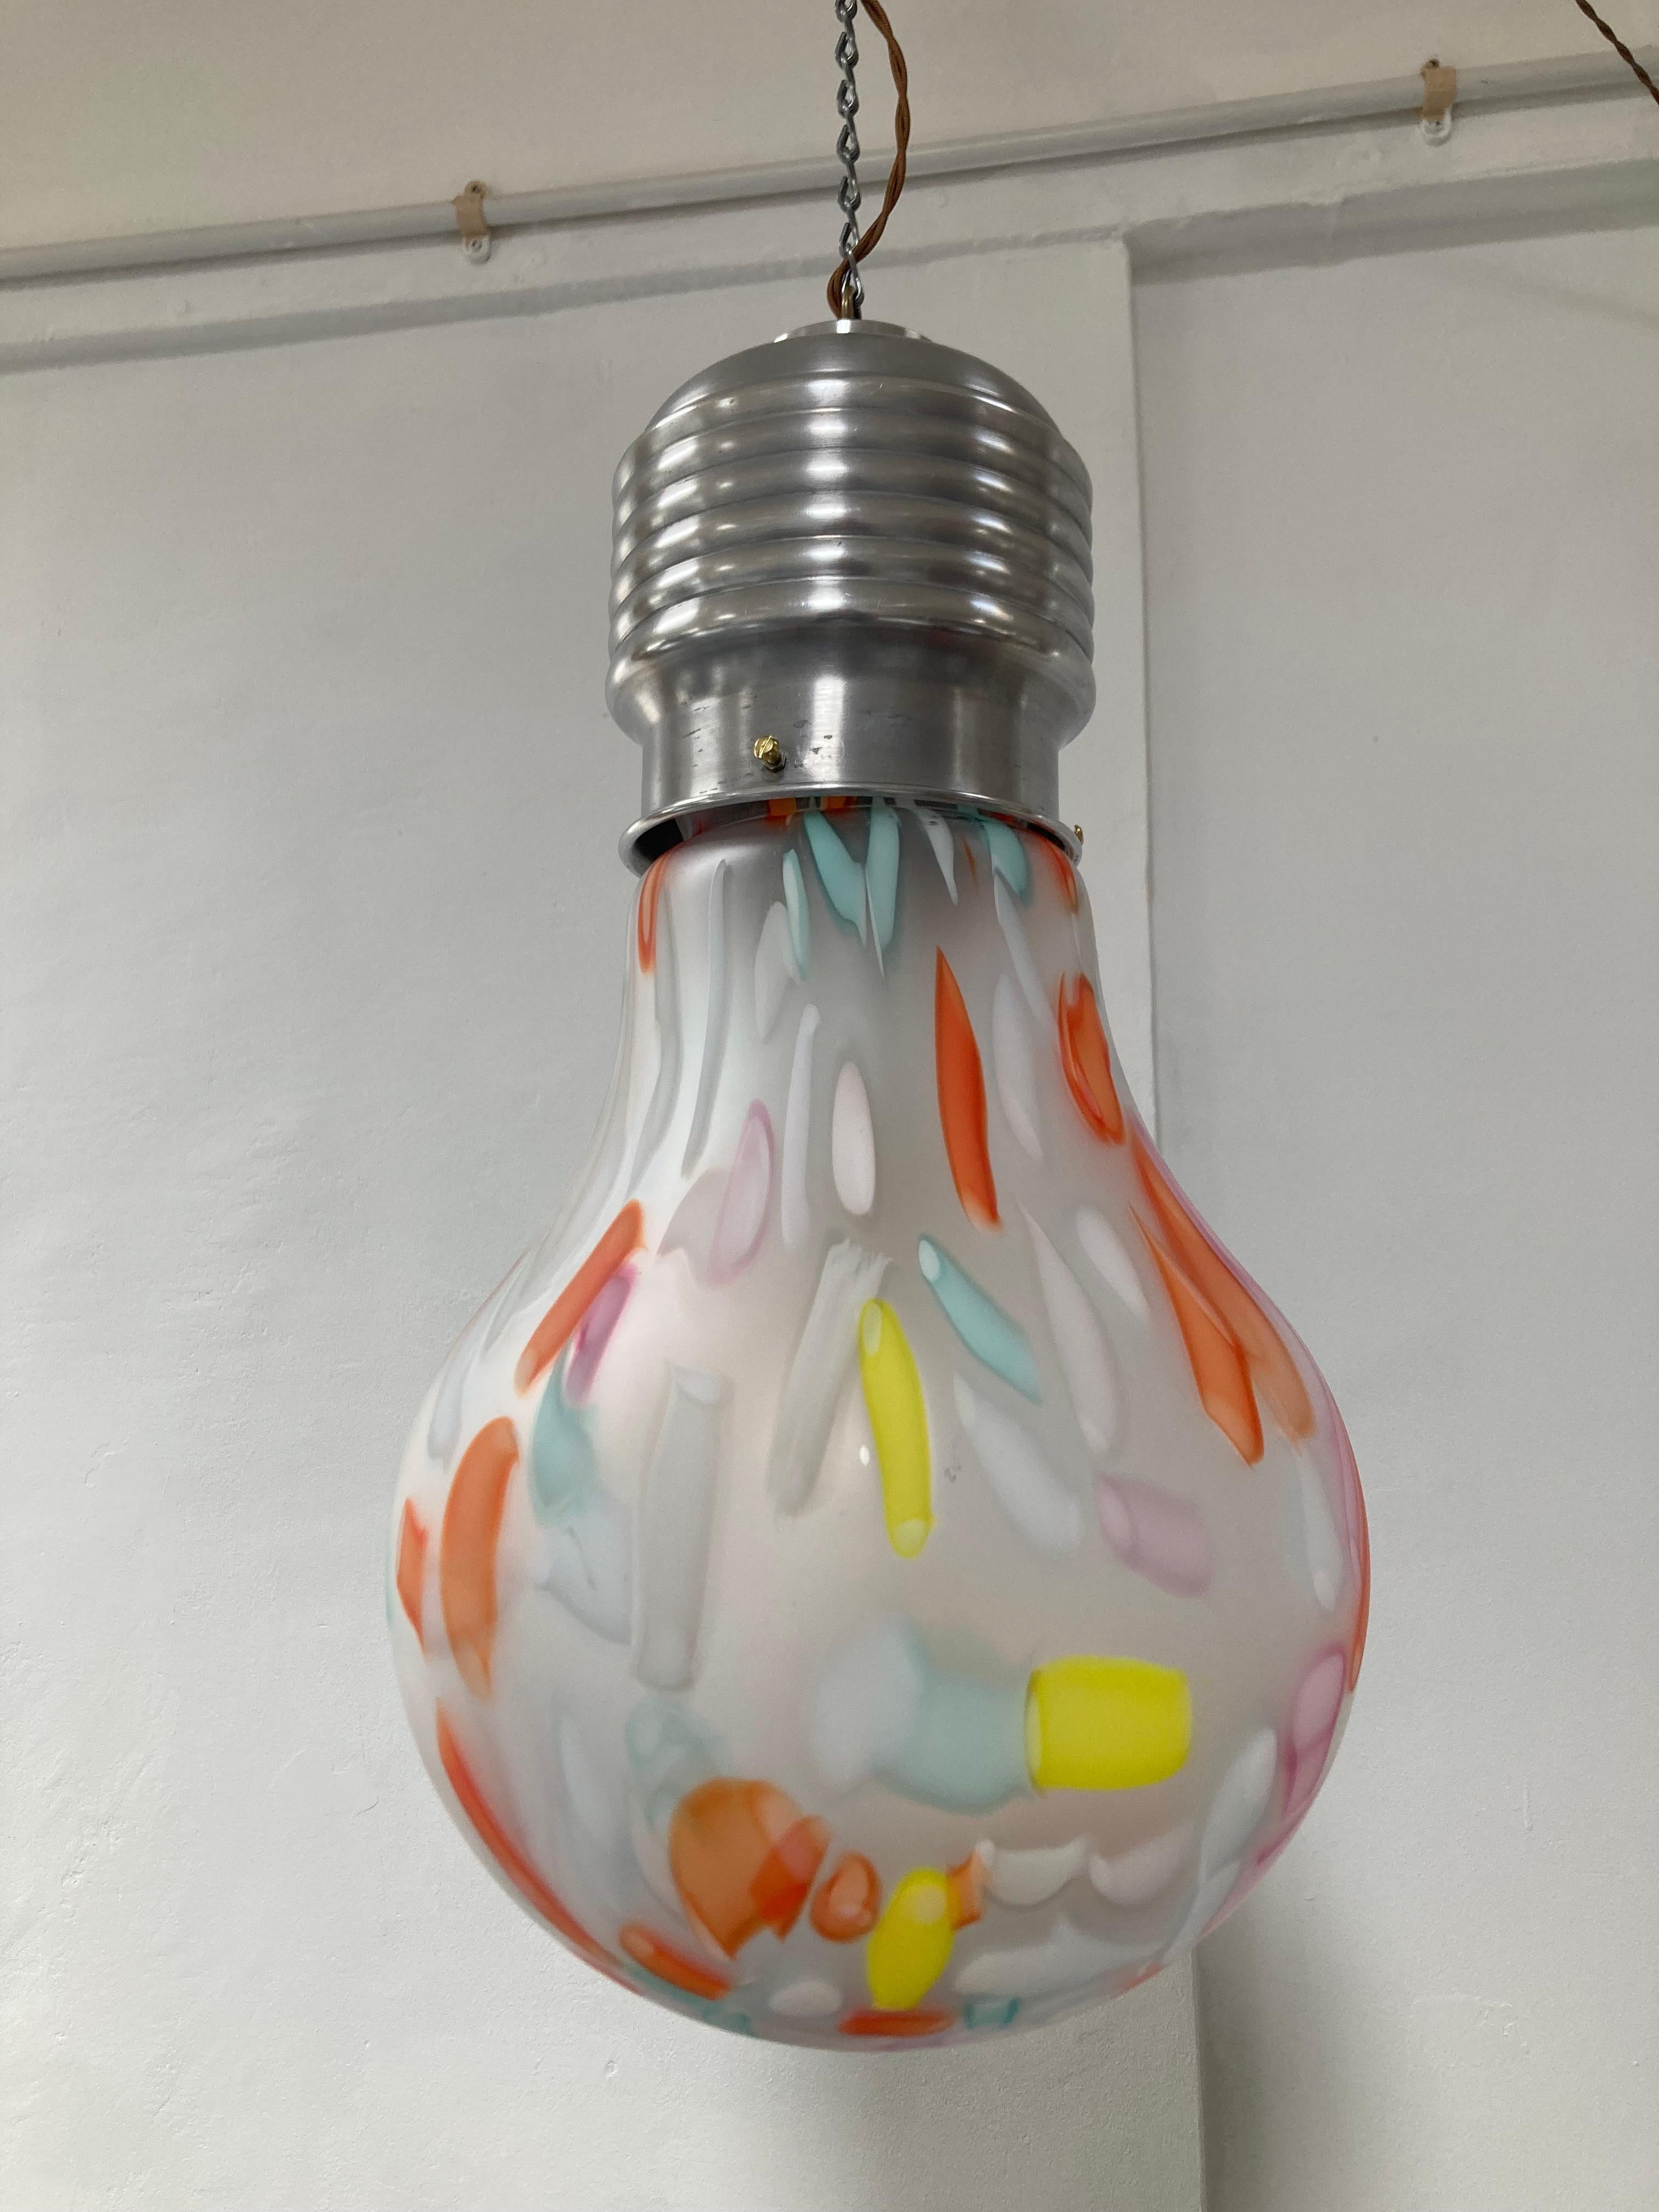 Super size Pop Art 1980's light bulb hanging pendant. This fabulous and fun hanging light resembles a light bulb with a luxe edge. It is mouth blown high quality glass with colours running through the frosted glass, giving a fun glow. The brushed